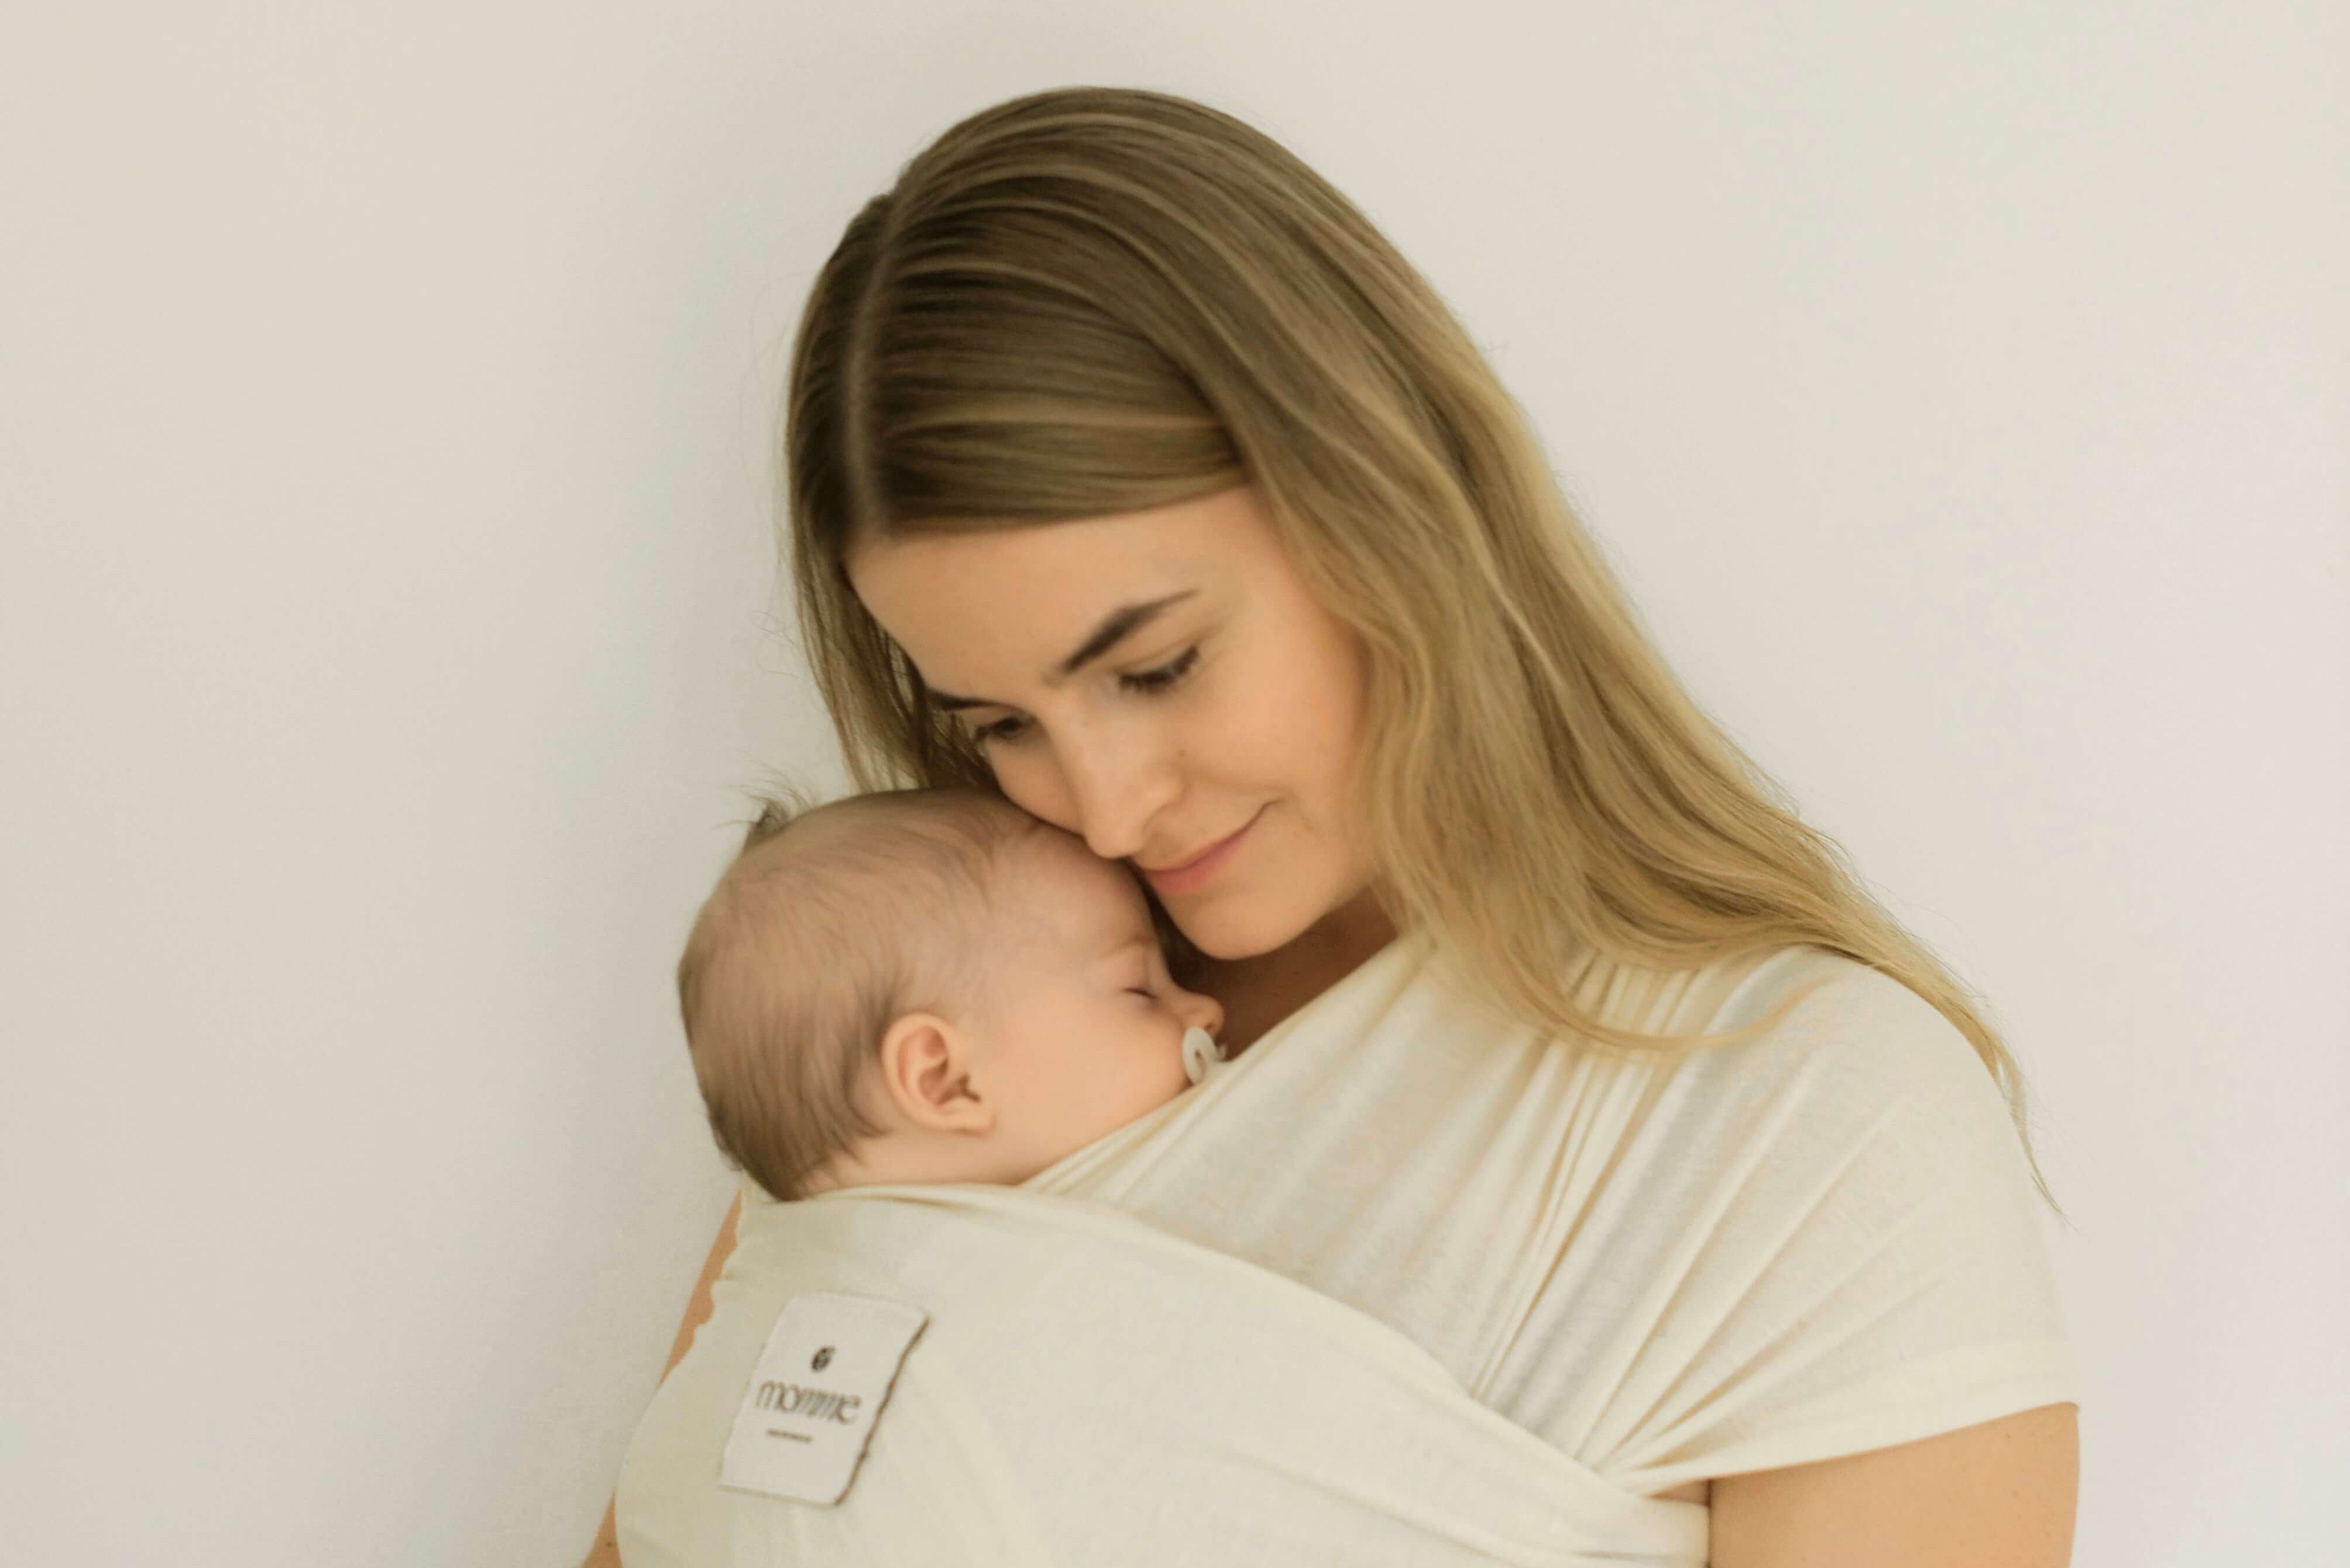 Momme | sustainable kangaroo wrap with baby in milk